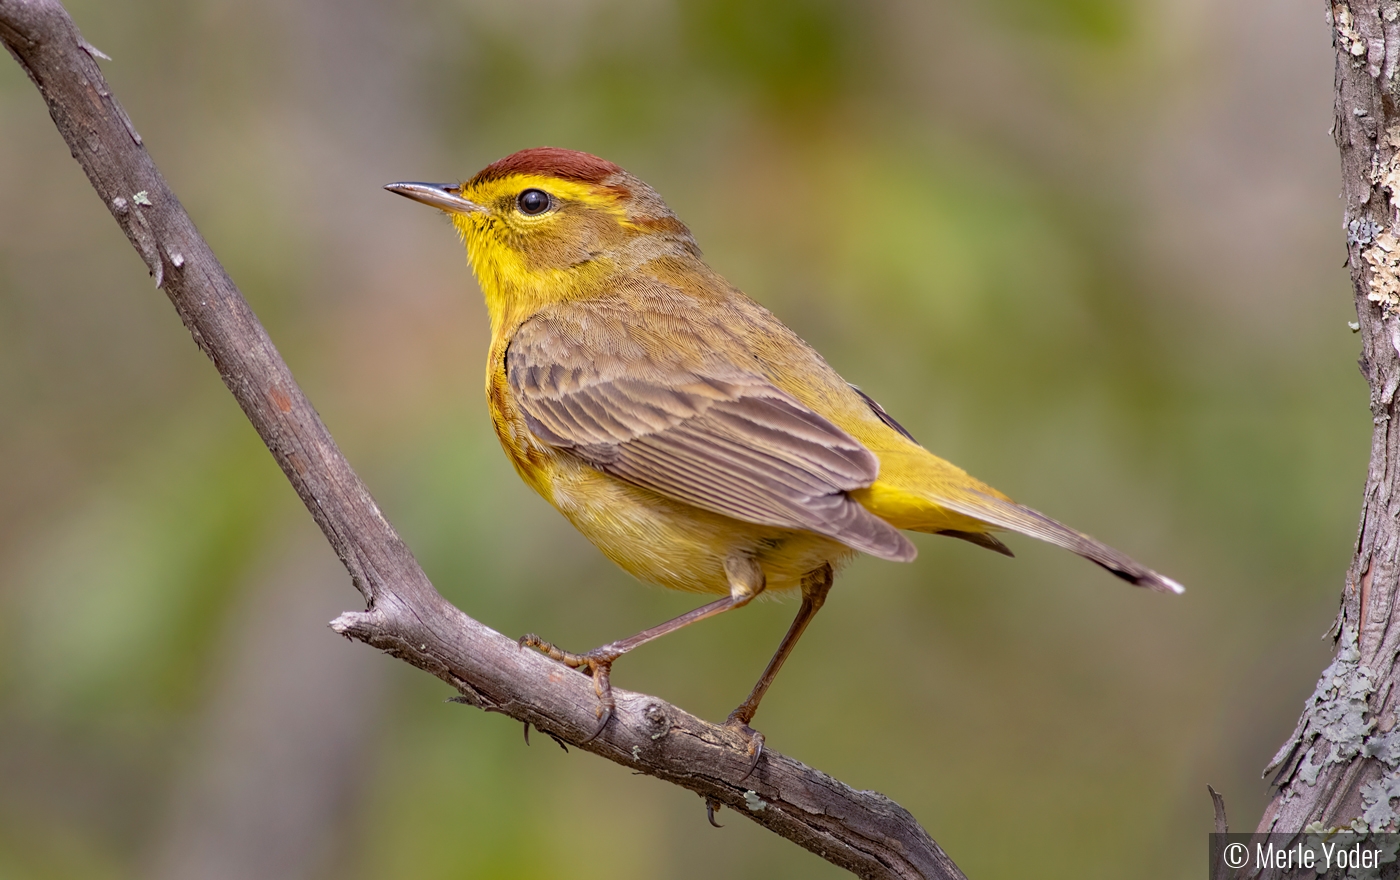 Palm warbler on the vine. by Merle Yoder